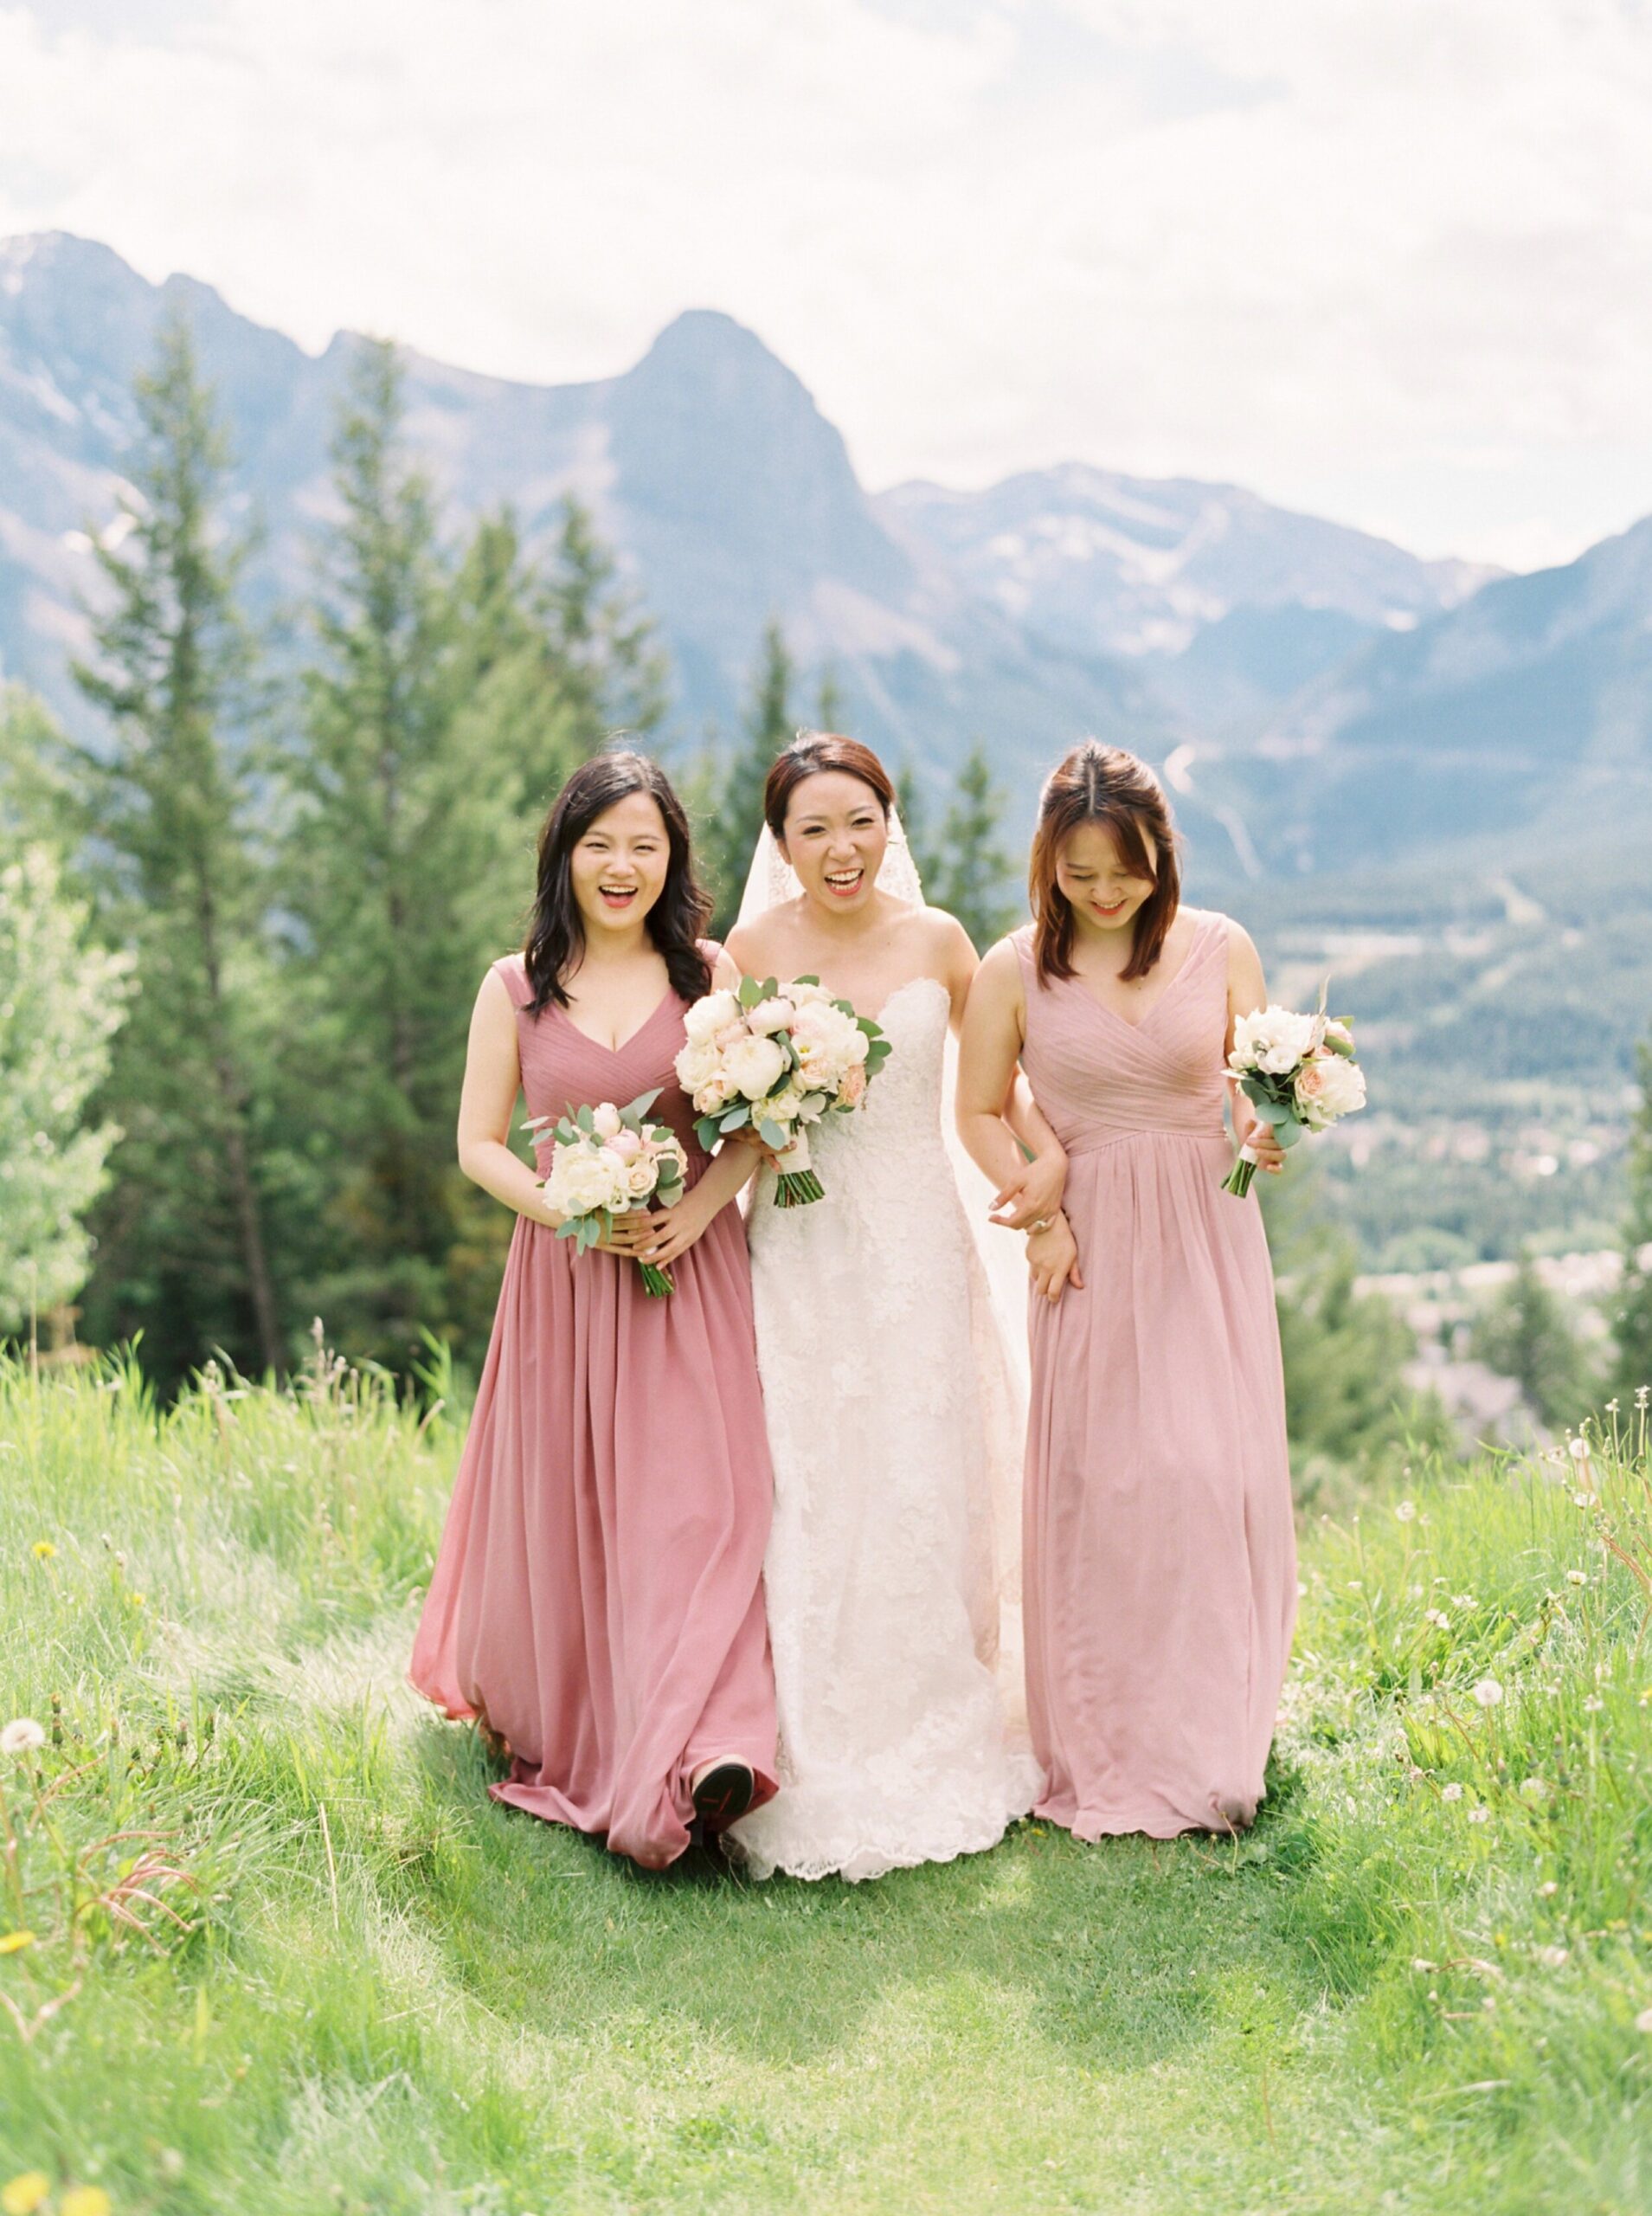  wedding party with mix matched blush pink dresses and navy suits and vests | silvertip canmore wedding photographers 